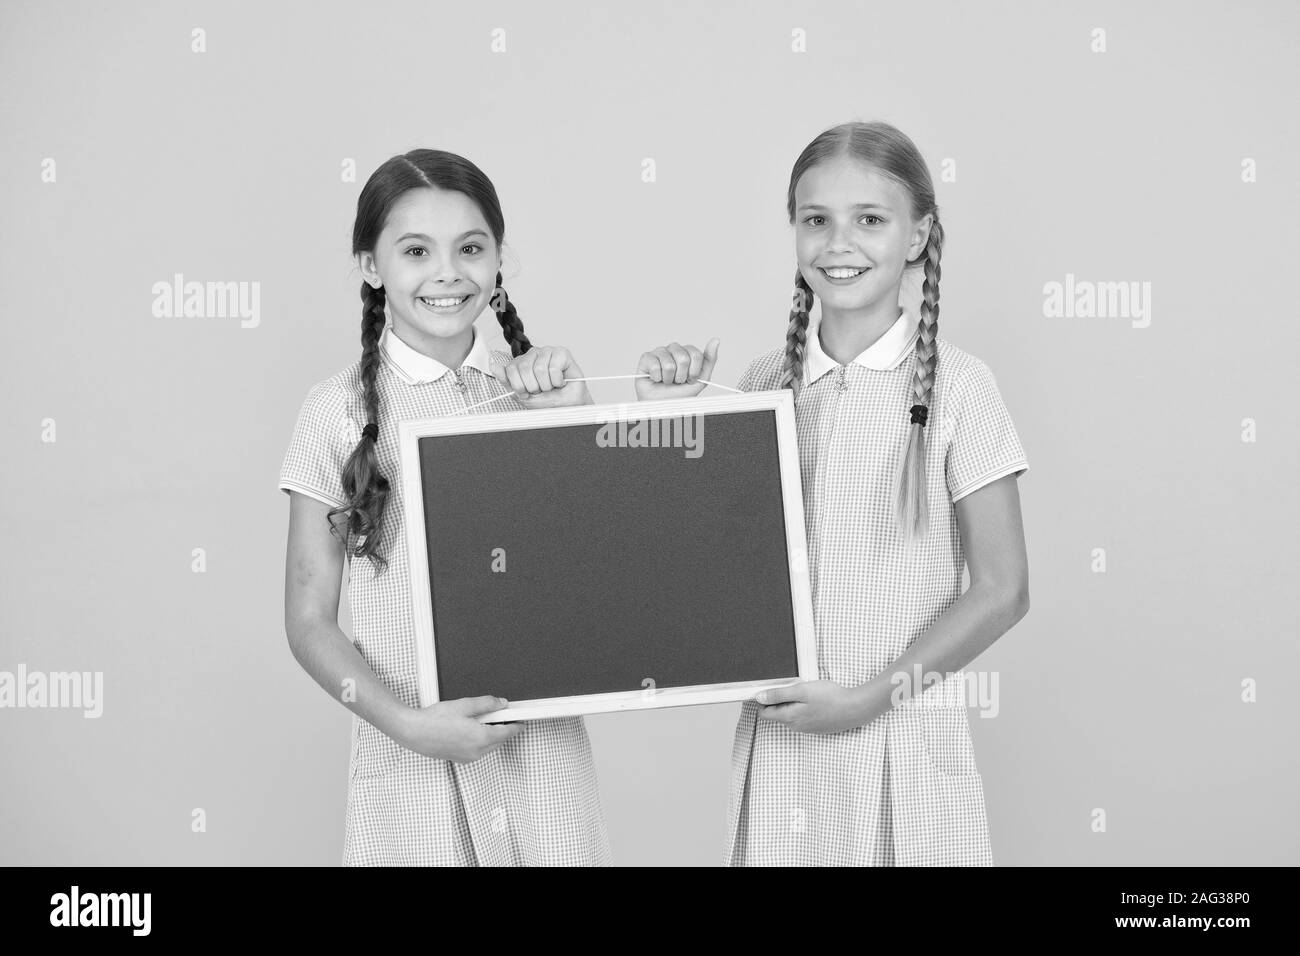 Back to school kids uniform Black and White Stock Photos & Images - Alamy